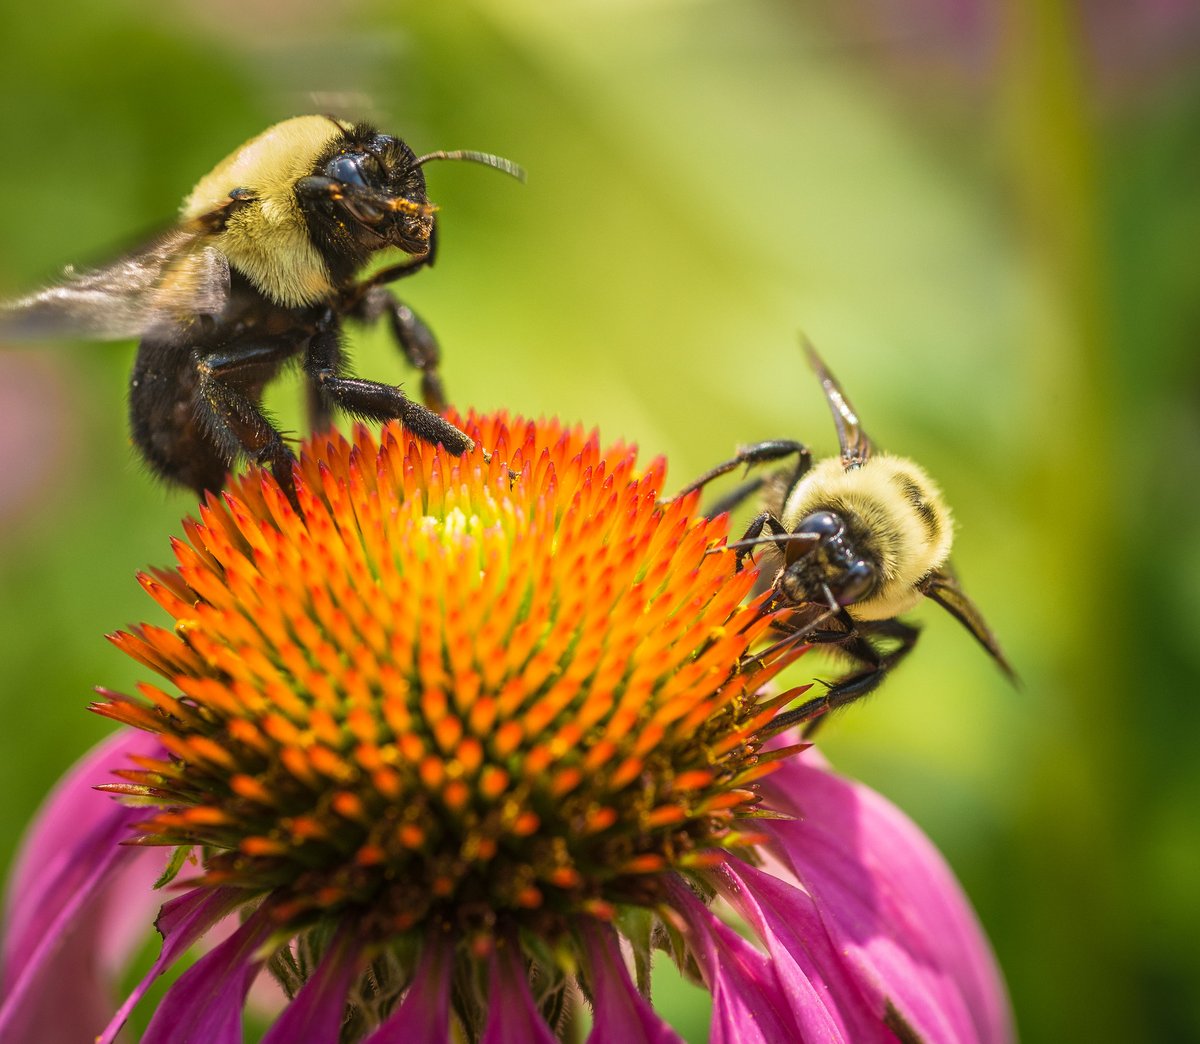 Happy World Bee Day! These pollinators provide vital but often unnoticed services with more than 3,500 species of native bees helping increase crop yields. Learn about all the different pollinator efforts at USDA: usda.gov/pollinators